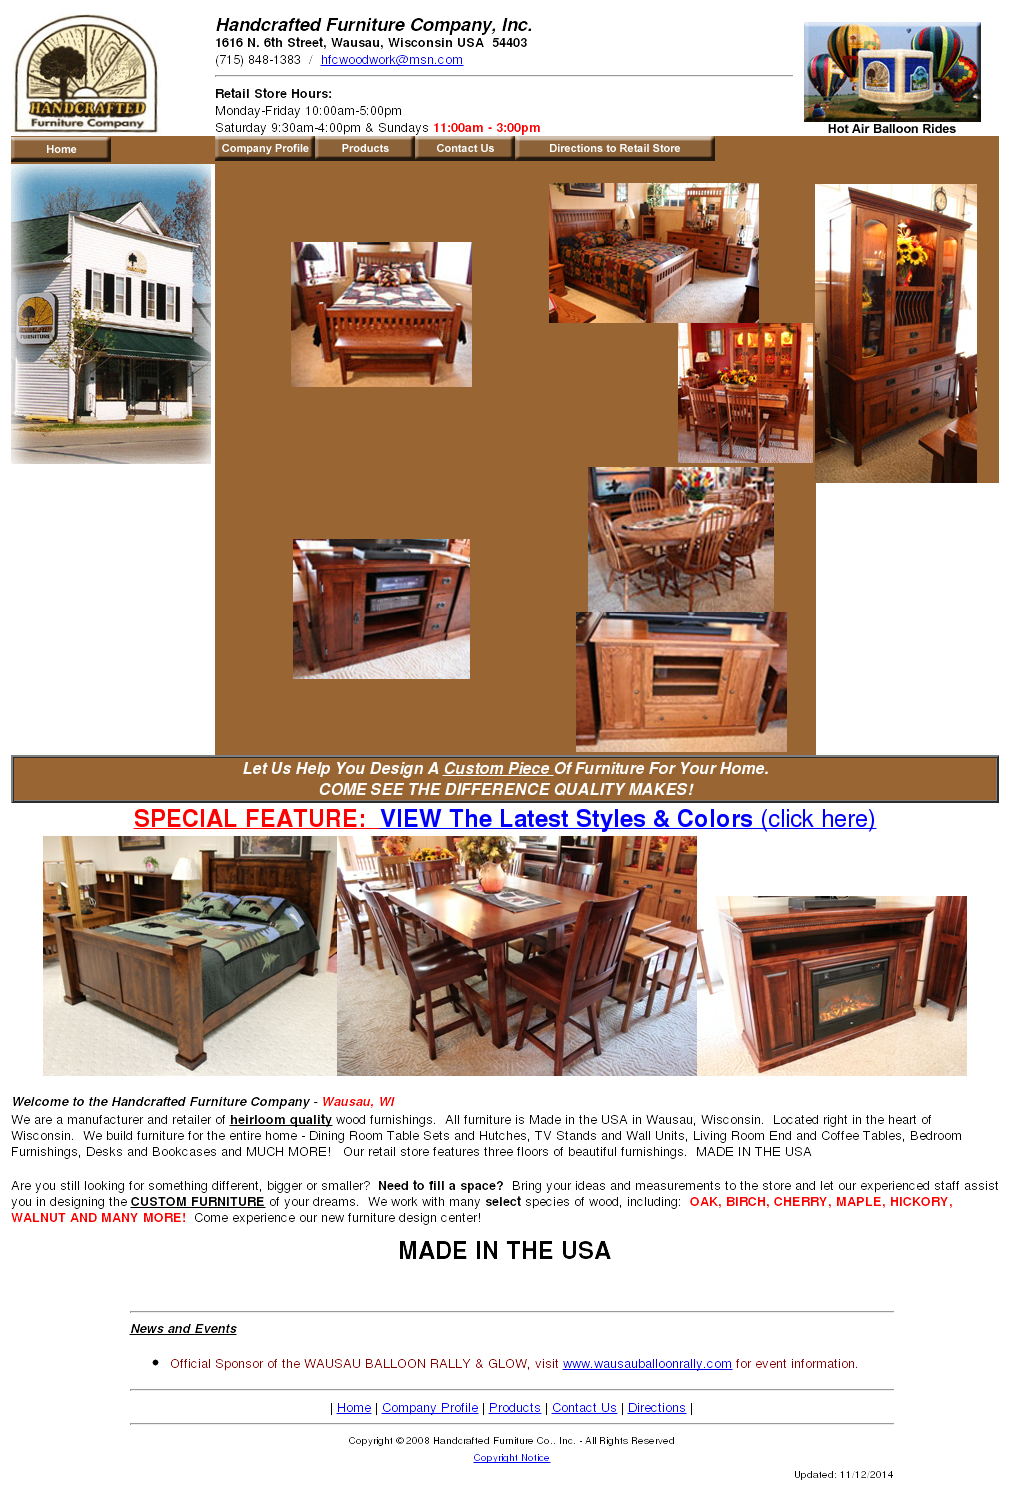 Handcrafted Furniture Balloon Competitors, Revenue And pertaining to Furniture Stores In Wausau Wi